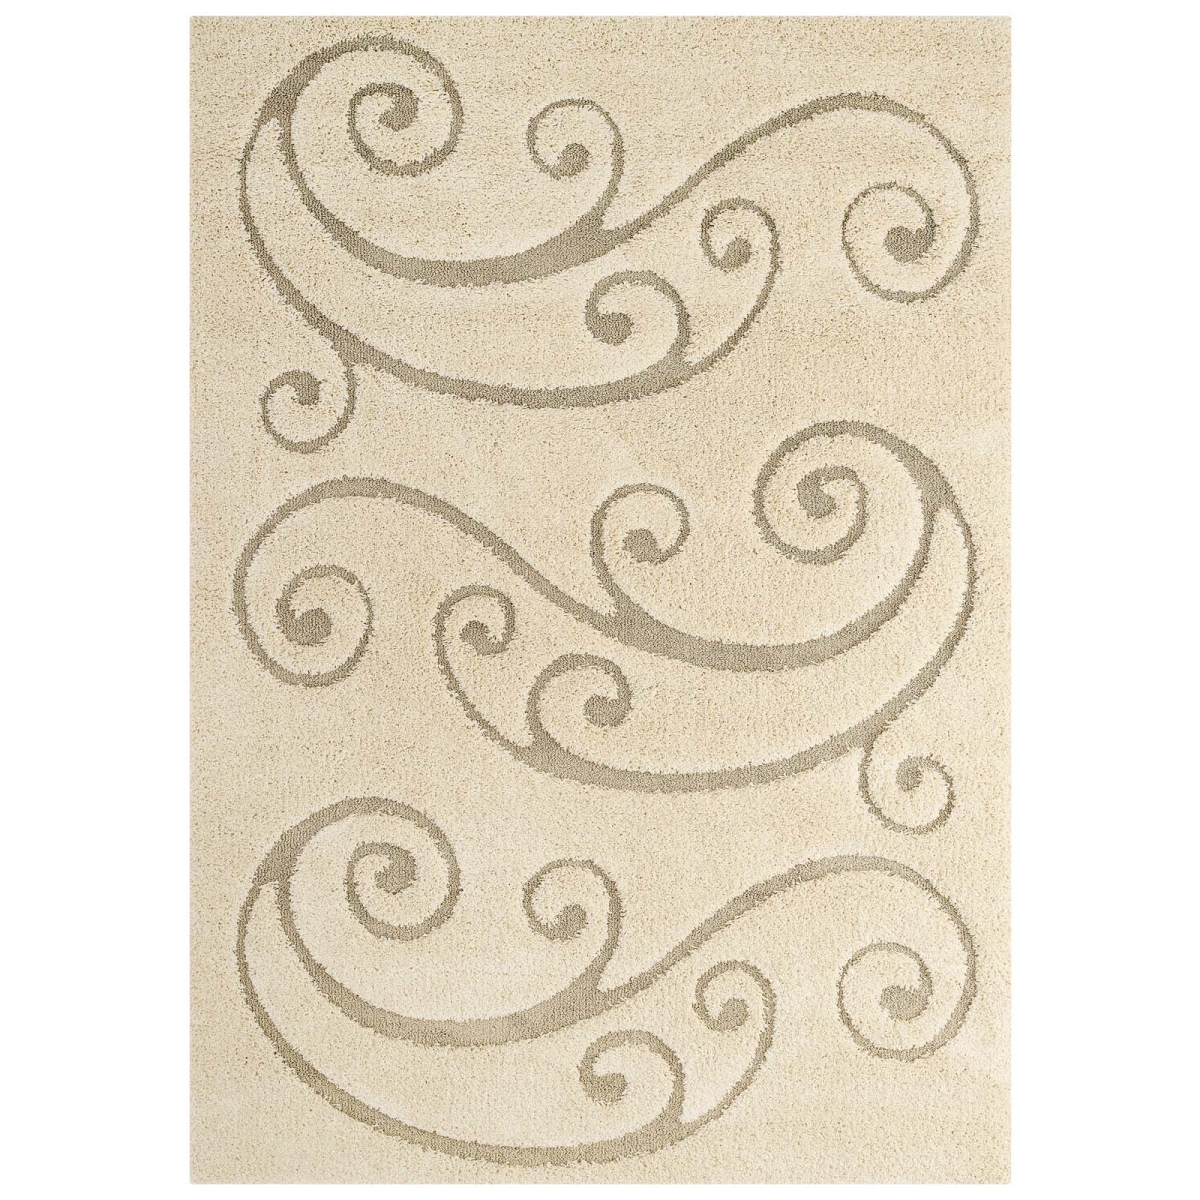 R-1148a-810 8 X 10 Ft. Sprout Scrolling Vine Shag Polypropylener Area Rug - Creame & Beige, 1 X 94.5 X 120 In.